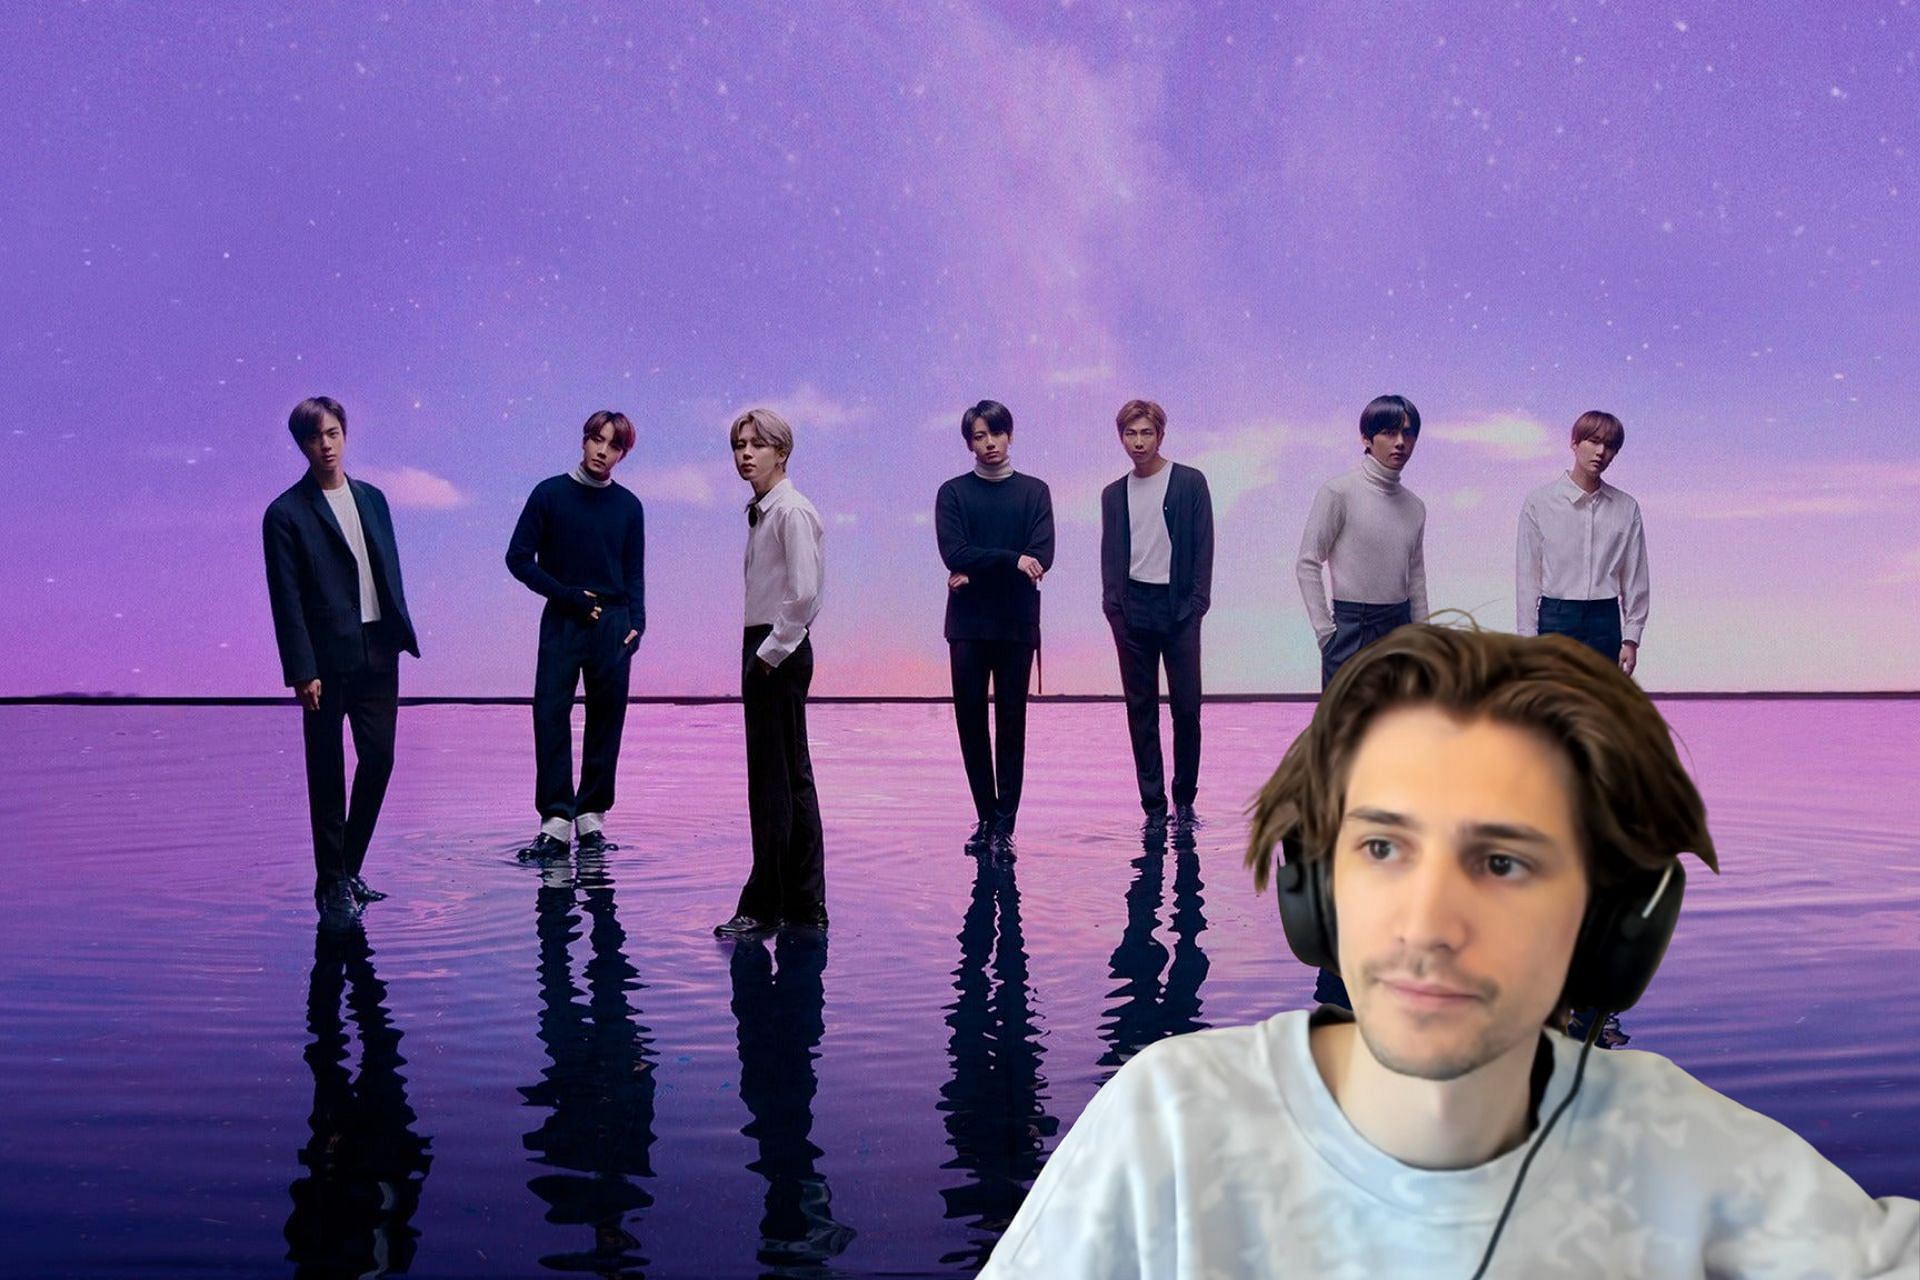 xQc confessed his love for BTS in his recent livestream (Image via Sportskeeda)